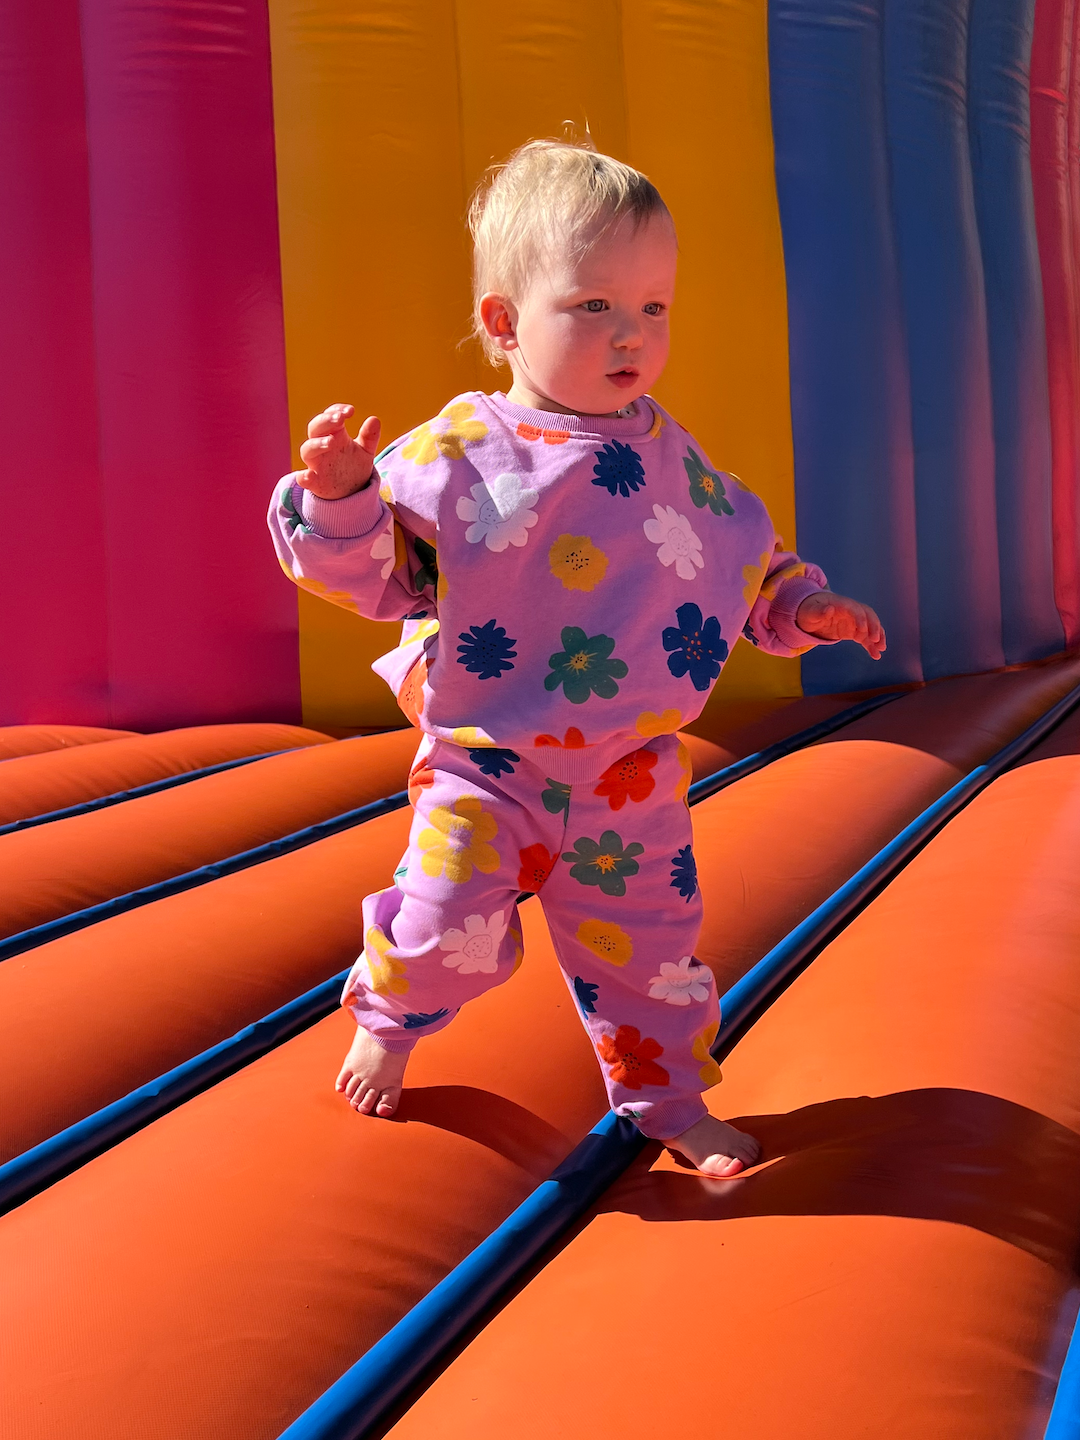 Purple | A toddler on a bouncy castle wearing a kids' sweatshirt and pants in purple, printed with yellow, orange, green, blue and white flowers